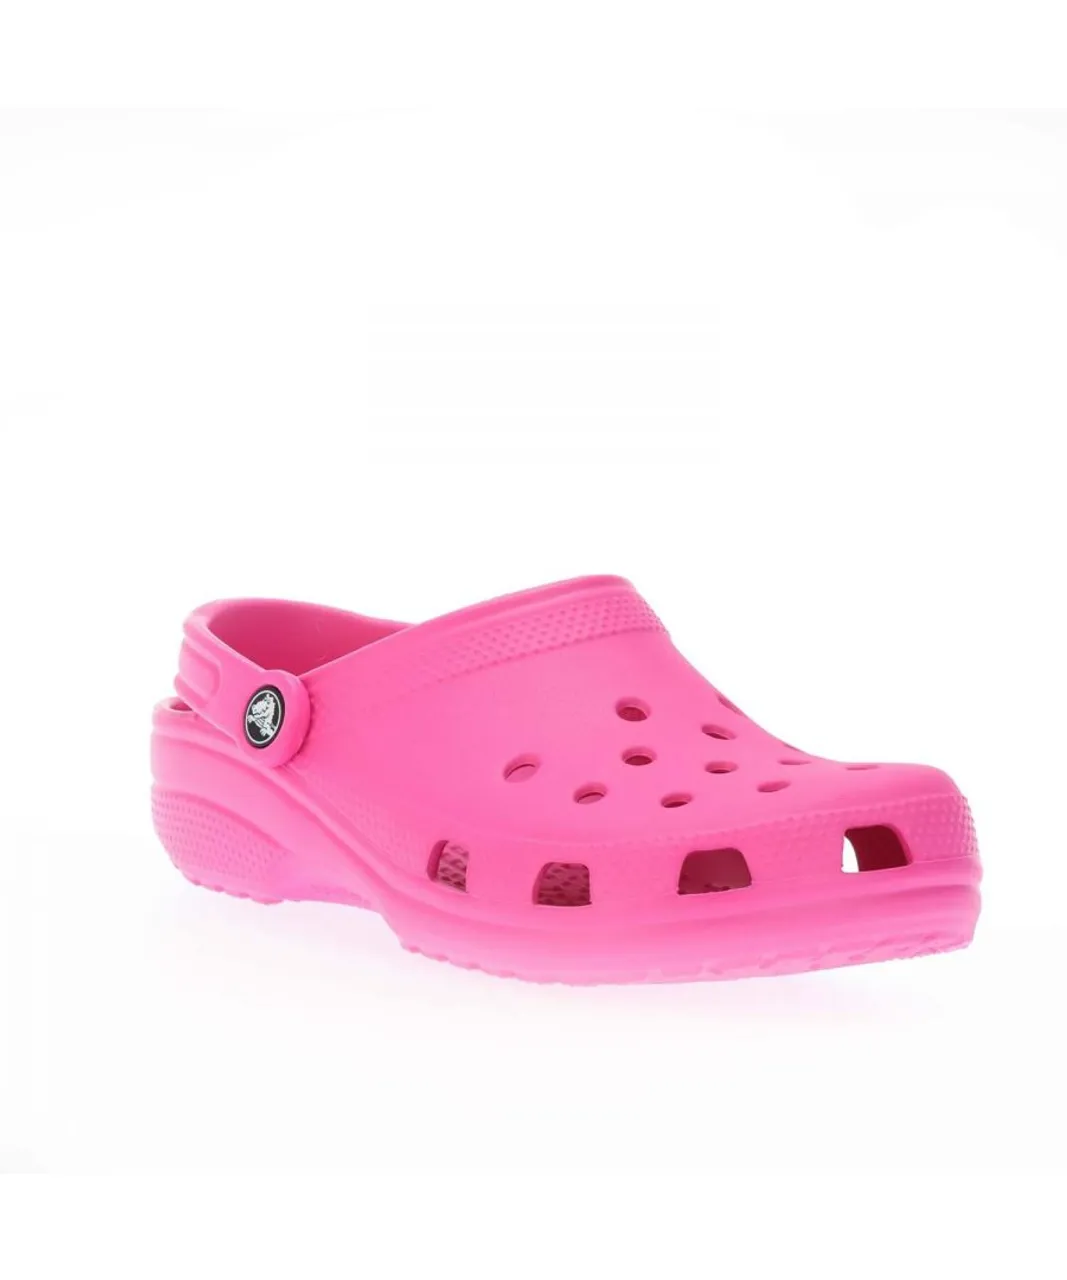 Crocs Womenss Classic Clogs in Pink